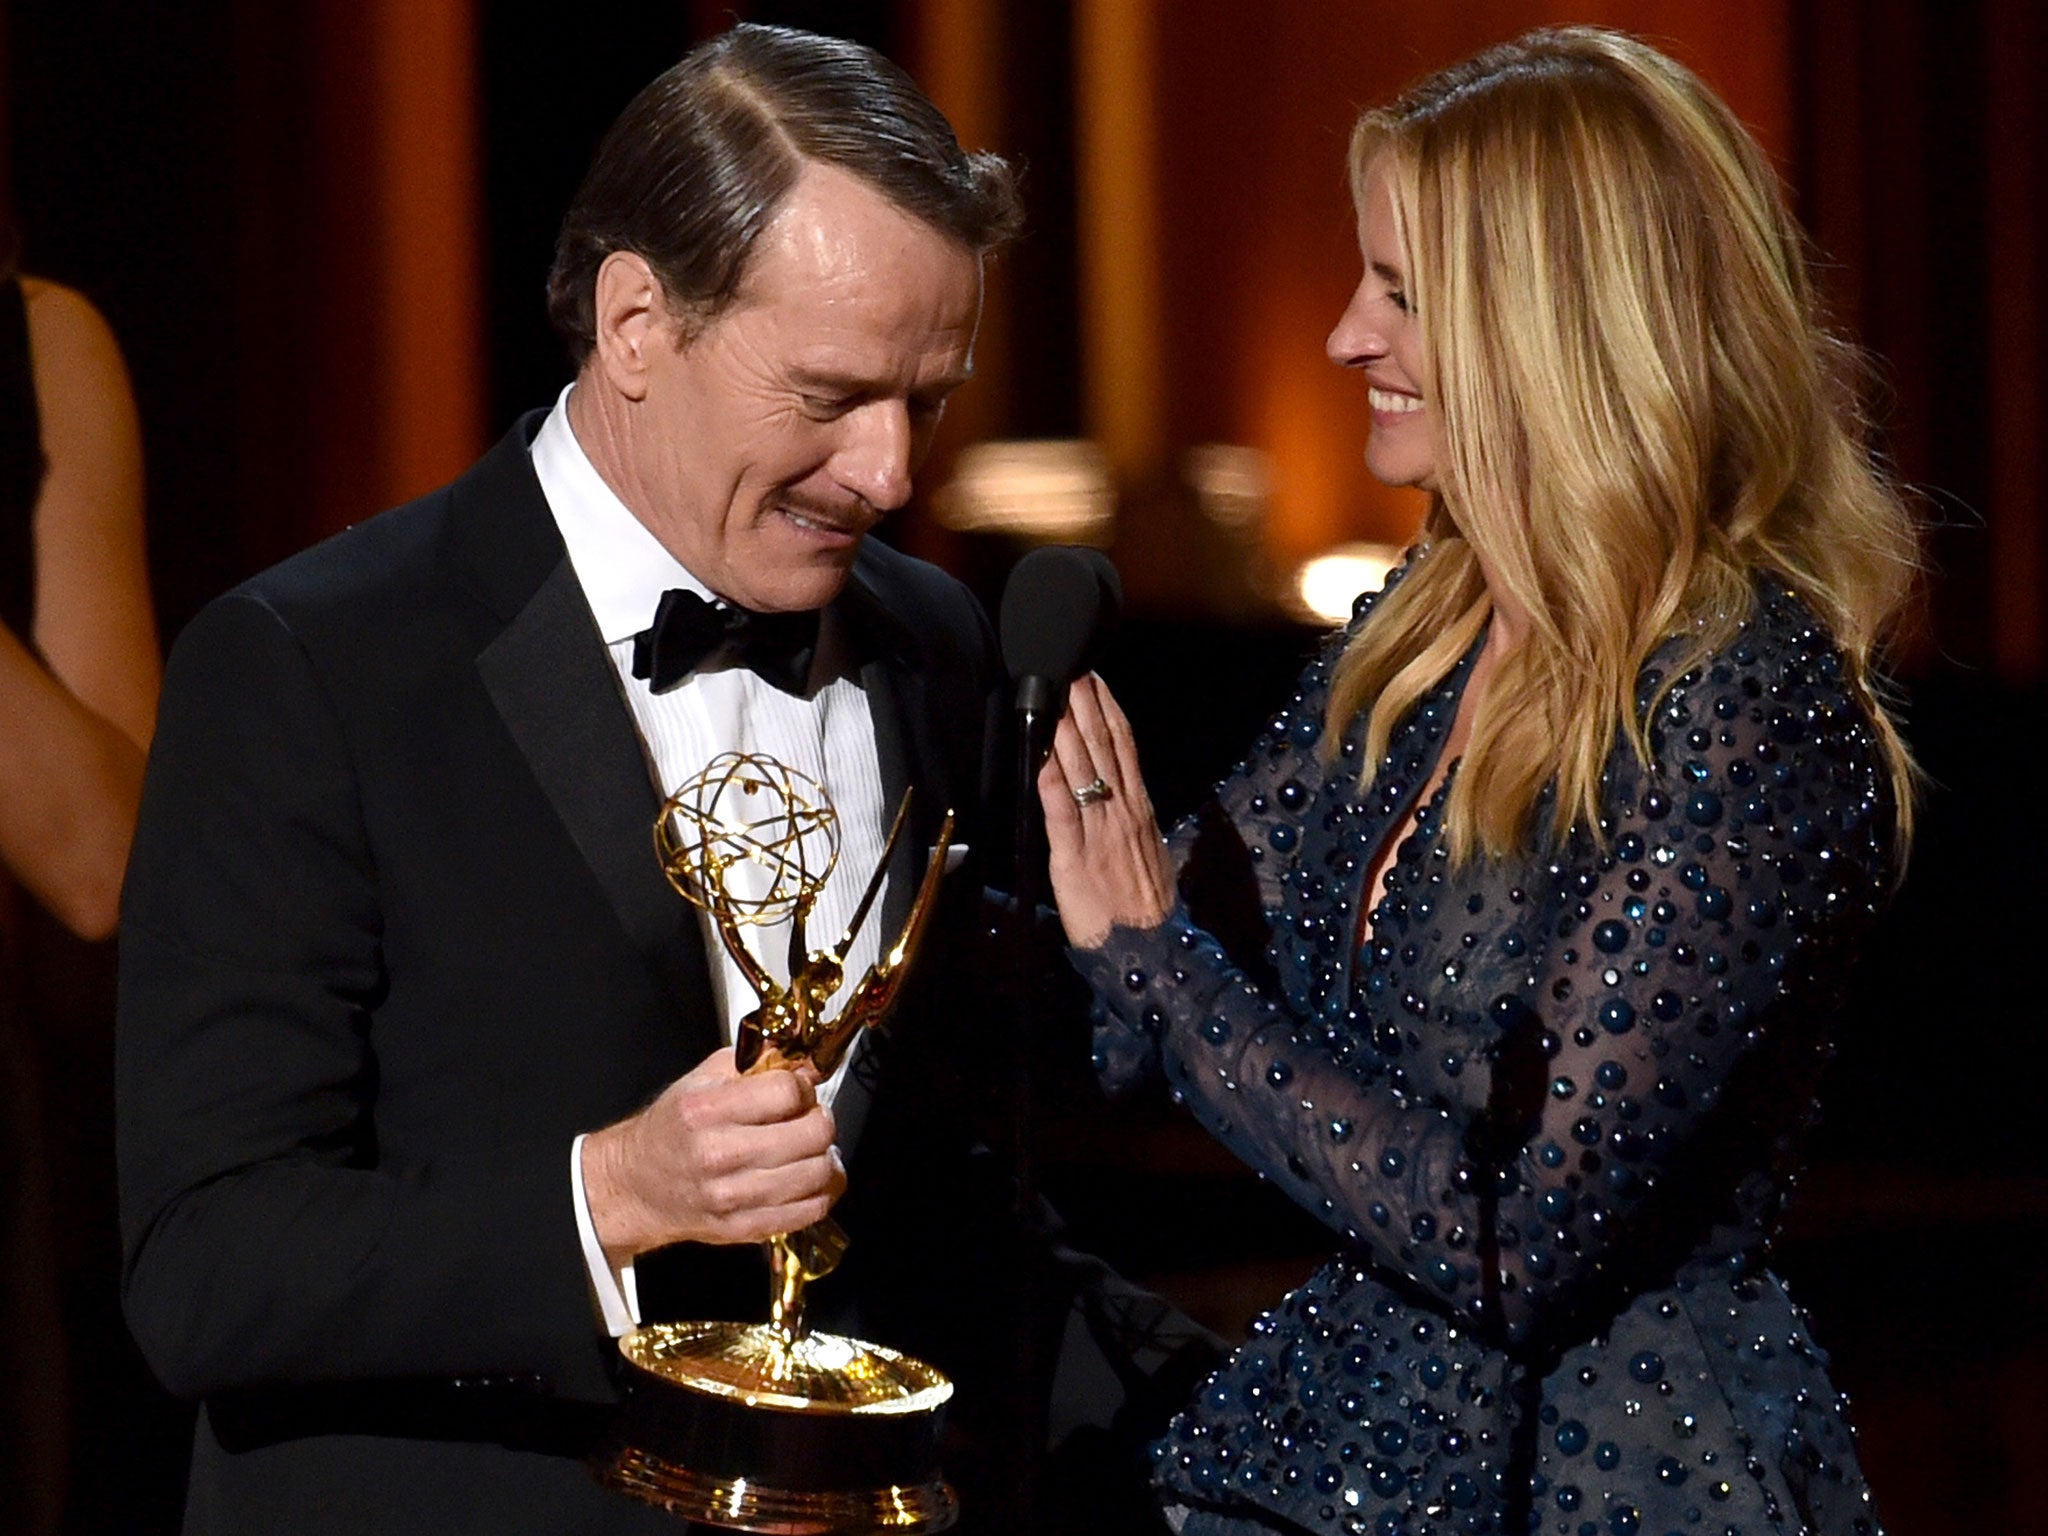 Actor Bryan Cranston (L) accepts Outstanding Lead Actor in a Drama Series for 'Breaking Bad' from actress Julia Roberts onstage at the 66th Annual Primetime Emmy Awards on August 25, 2014.